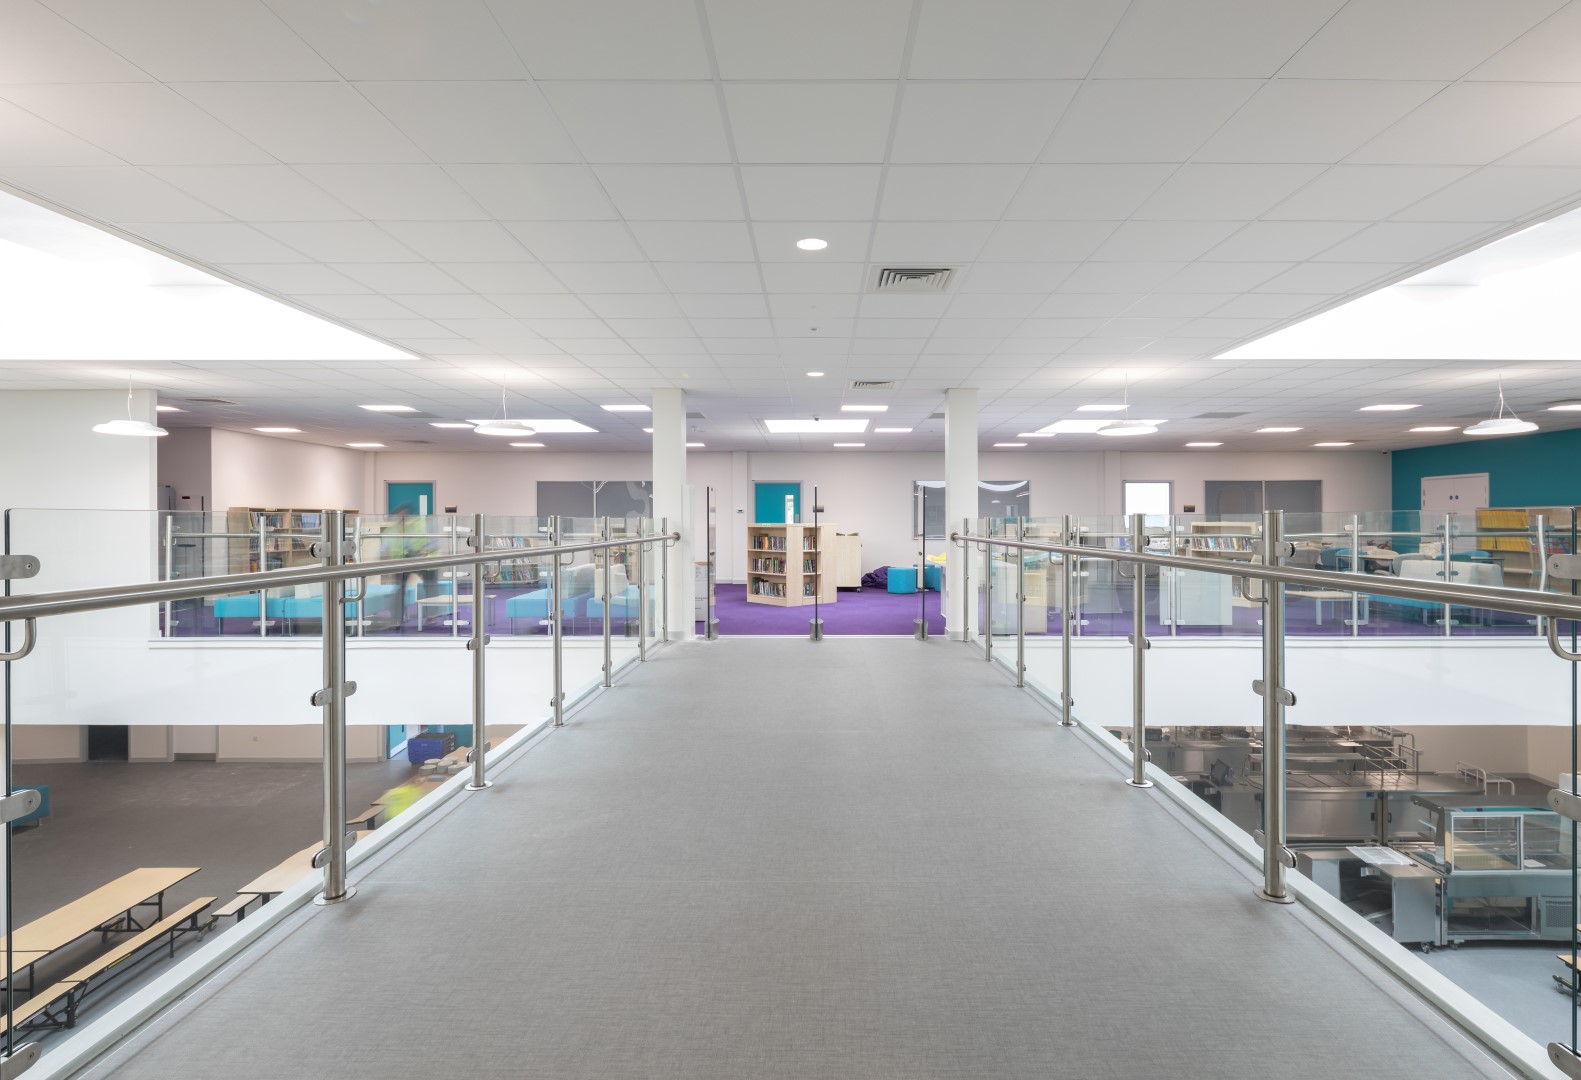 Altro serenade reduces noise and increases comfort at new £17m reach free school